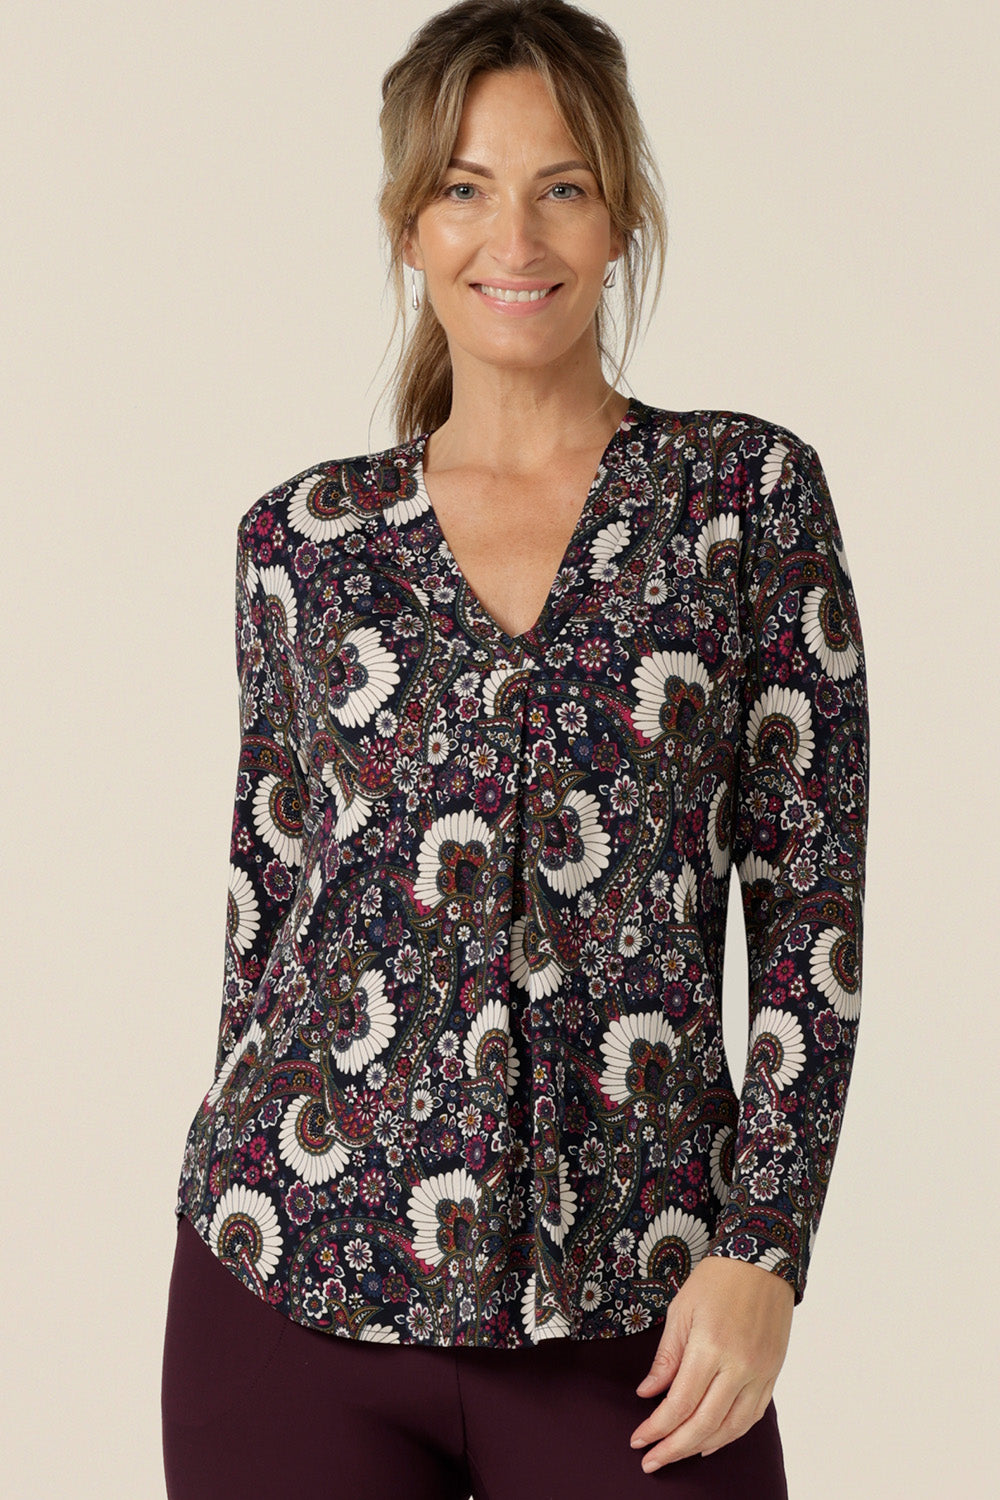 A size 10 woman wears a long-sleeve, V-neck top in paisley print jersey. Made in Australia by Australian and New Zealand women's clothing label, L&F this tailored work top is available to shop in sizes 8 to 24.